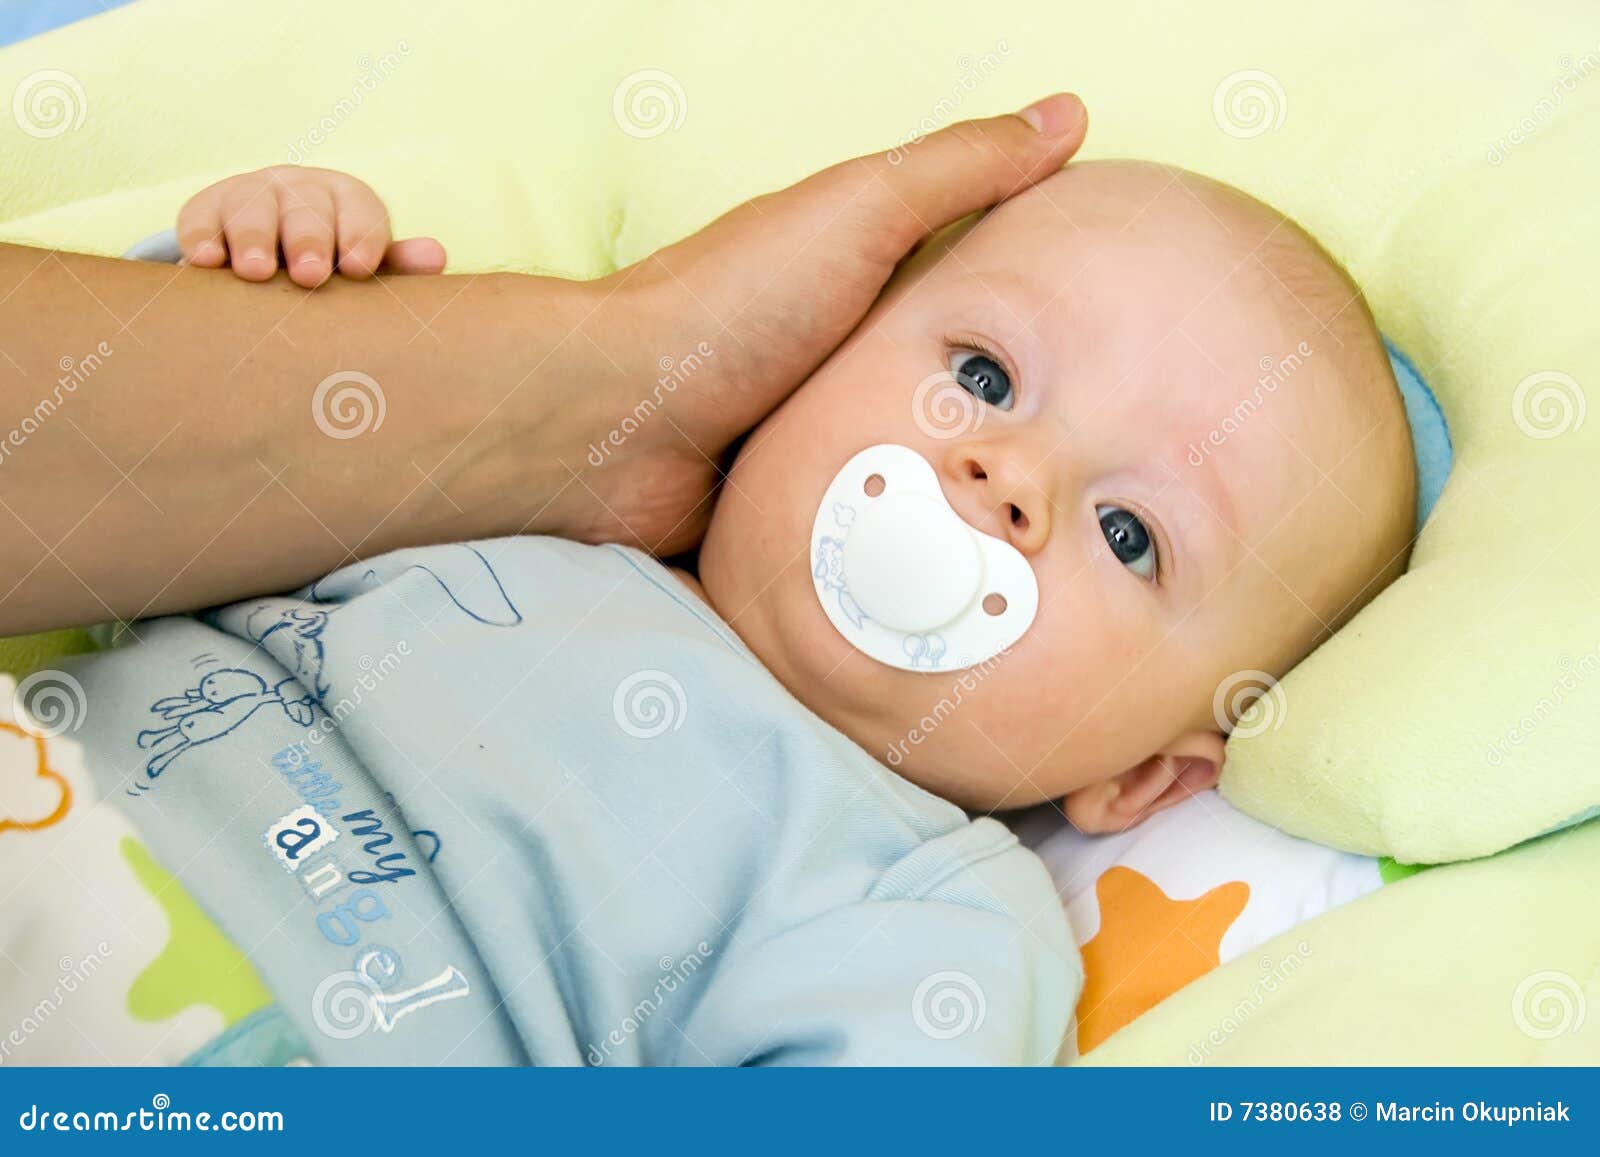 Baby With Dummy - Pacifier Royalty Free Stock Photos - Image: 7380638